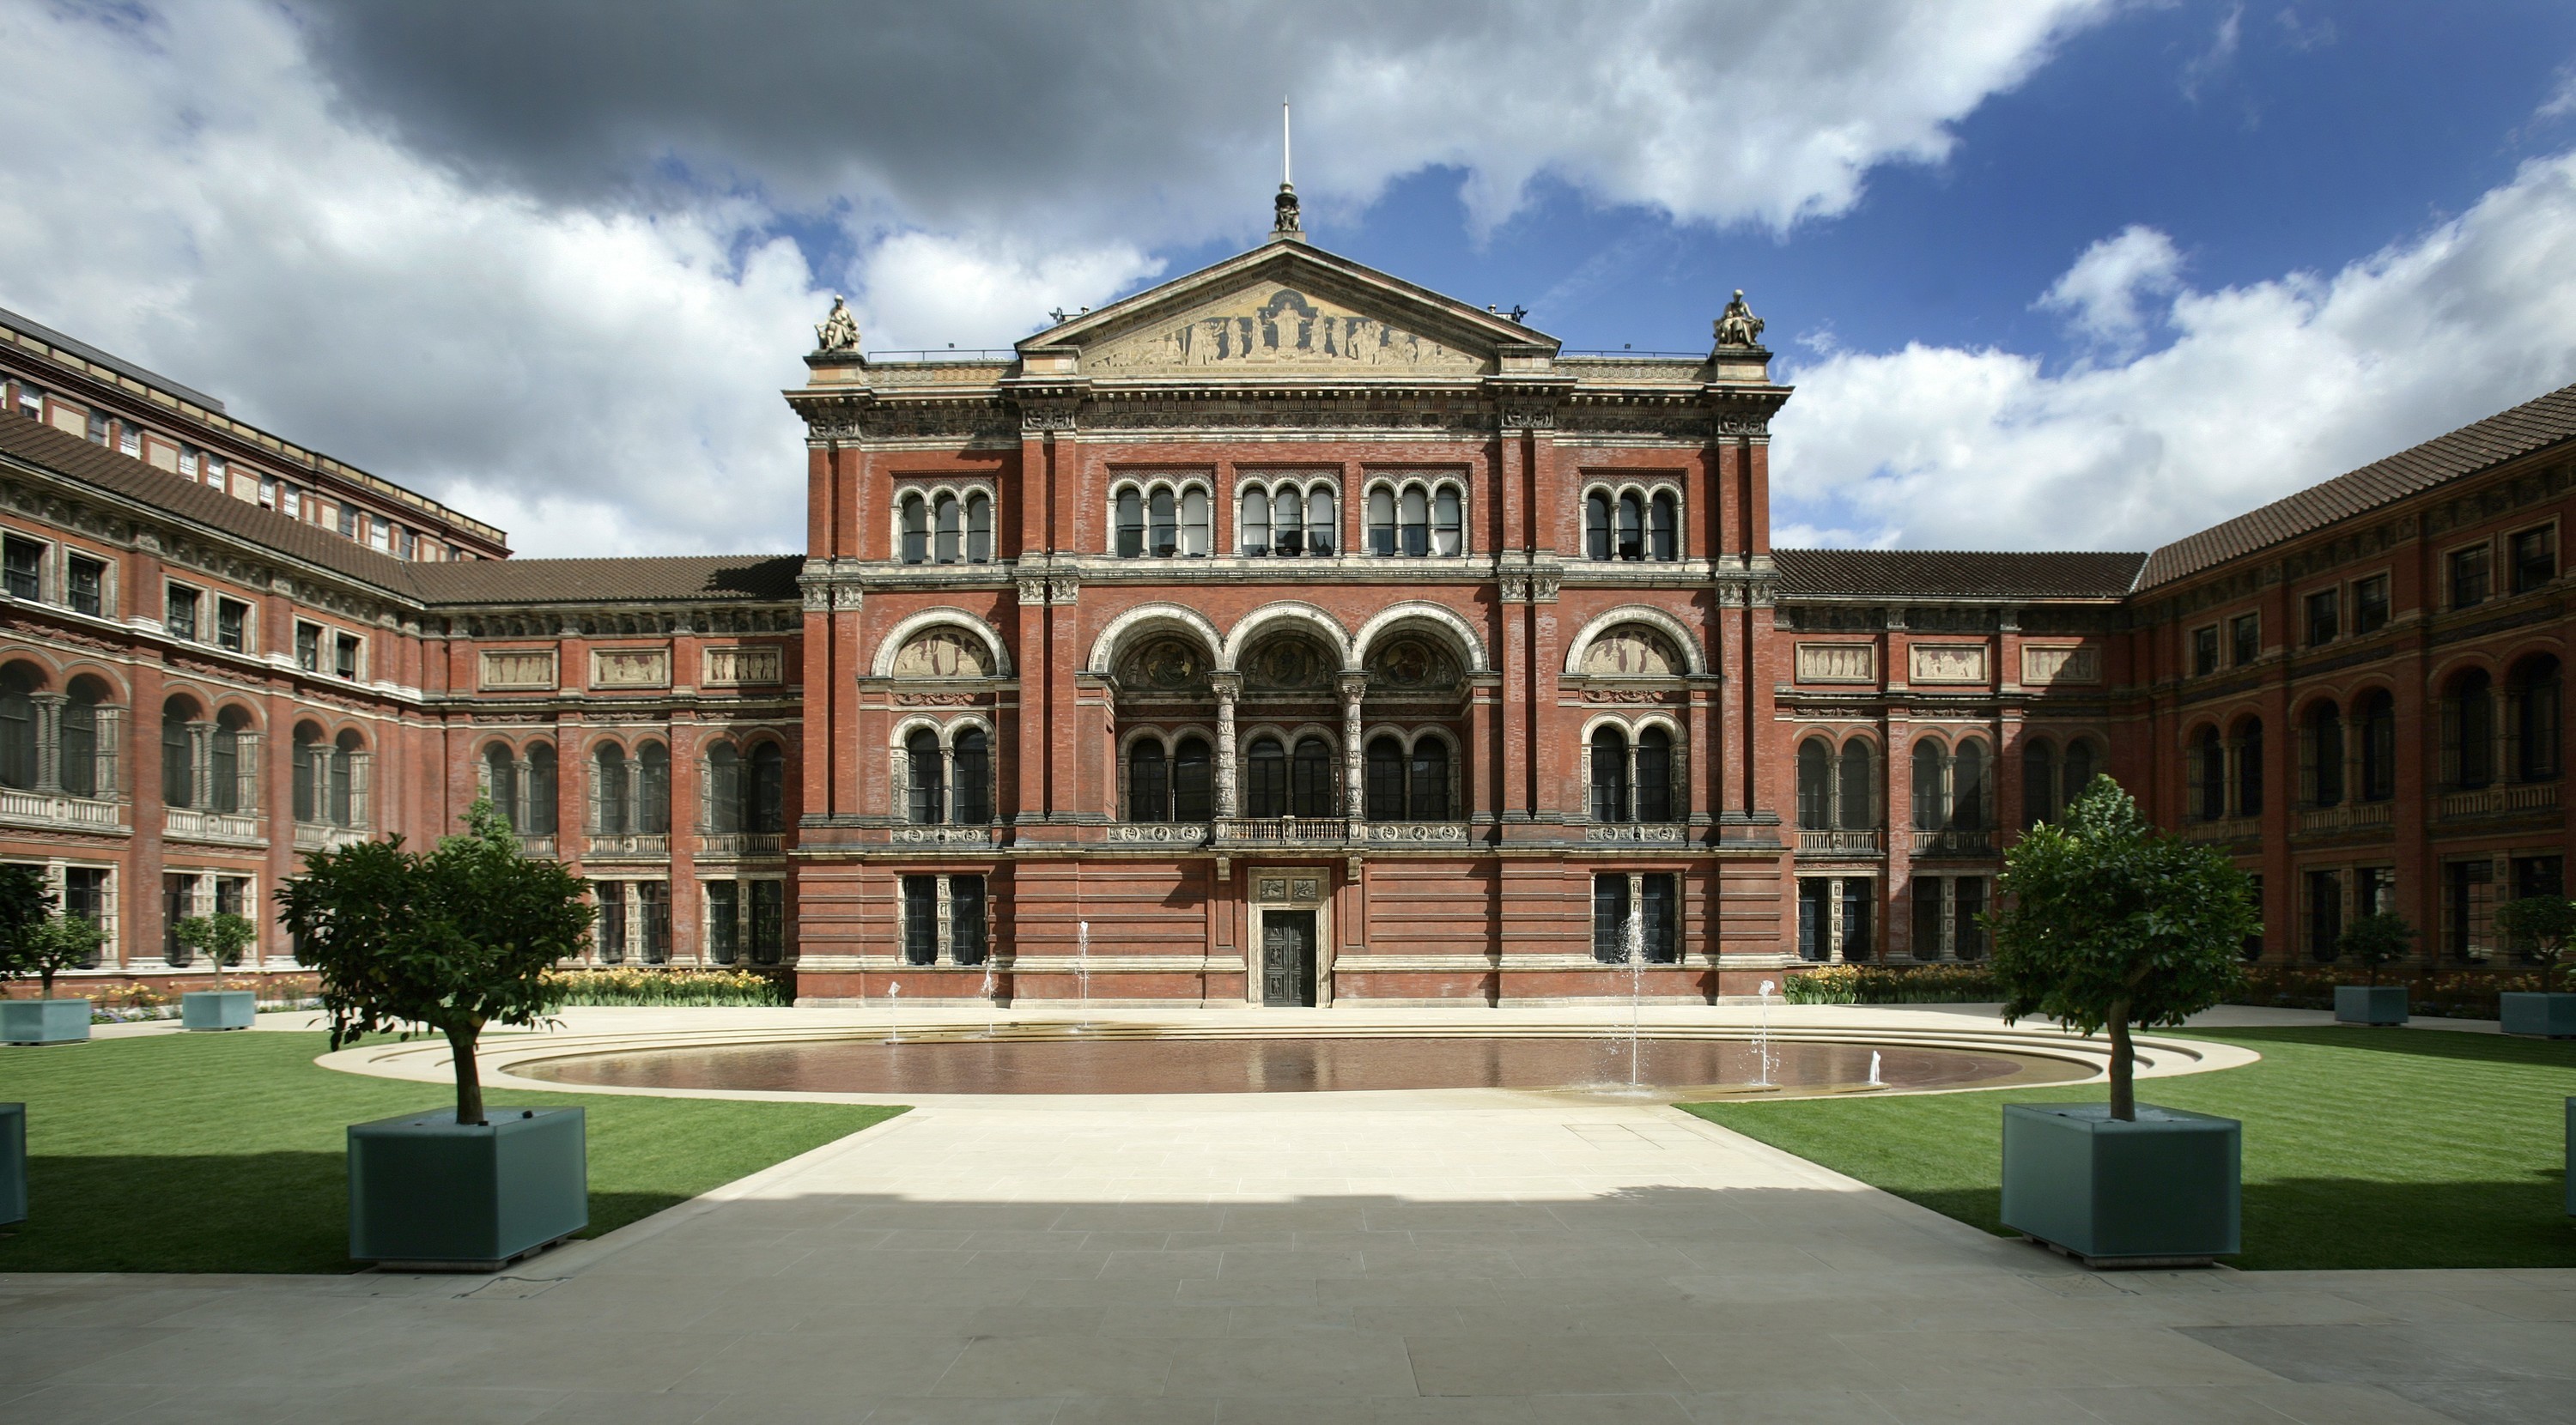 General view of the Victoria and Albert Museum in west London (Source